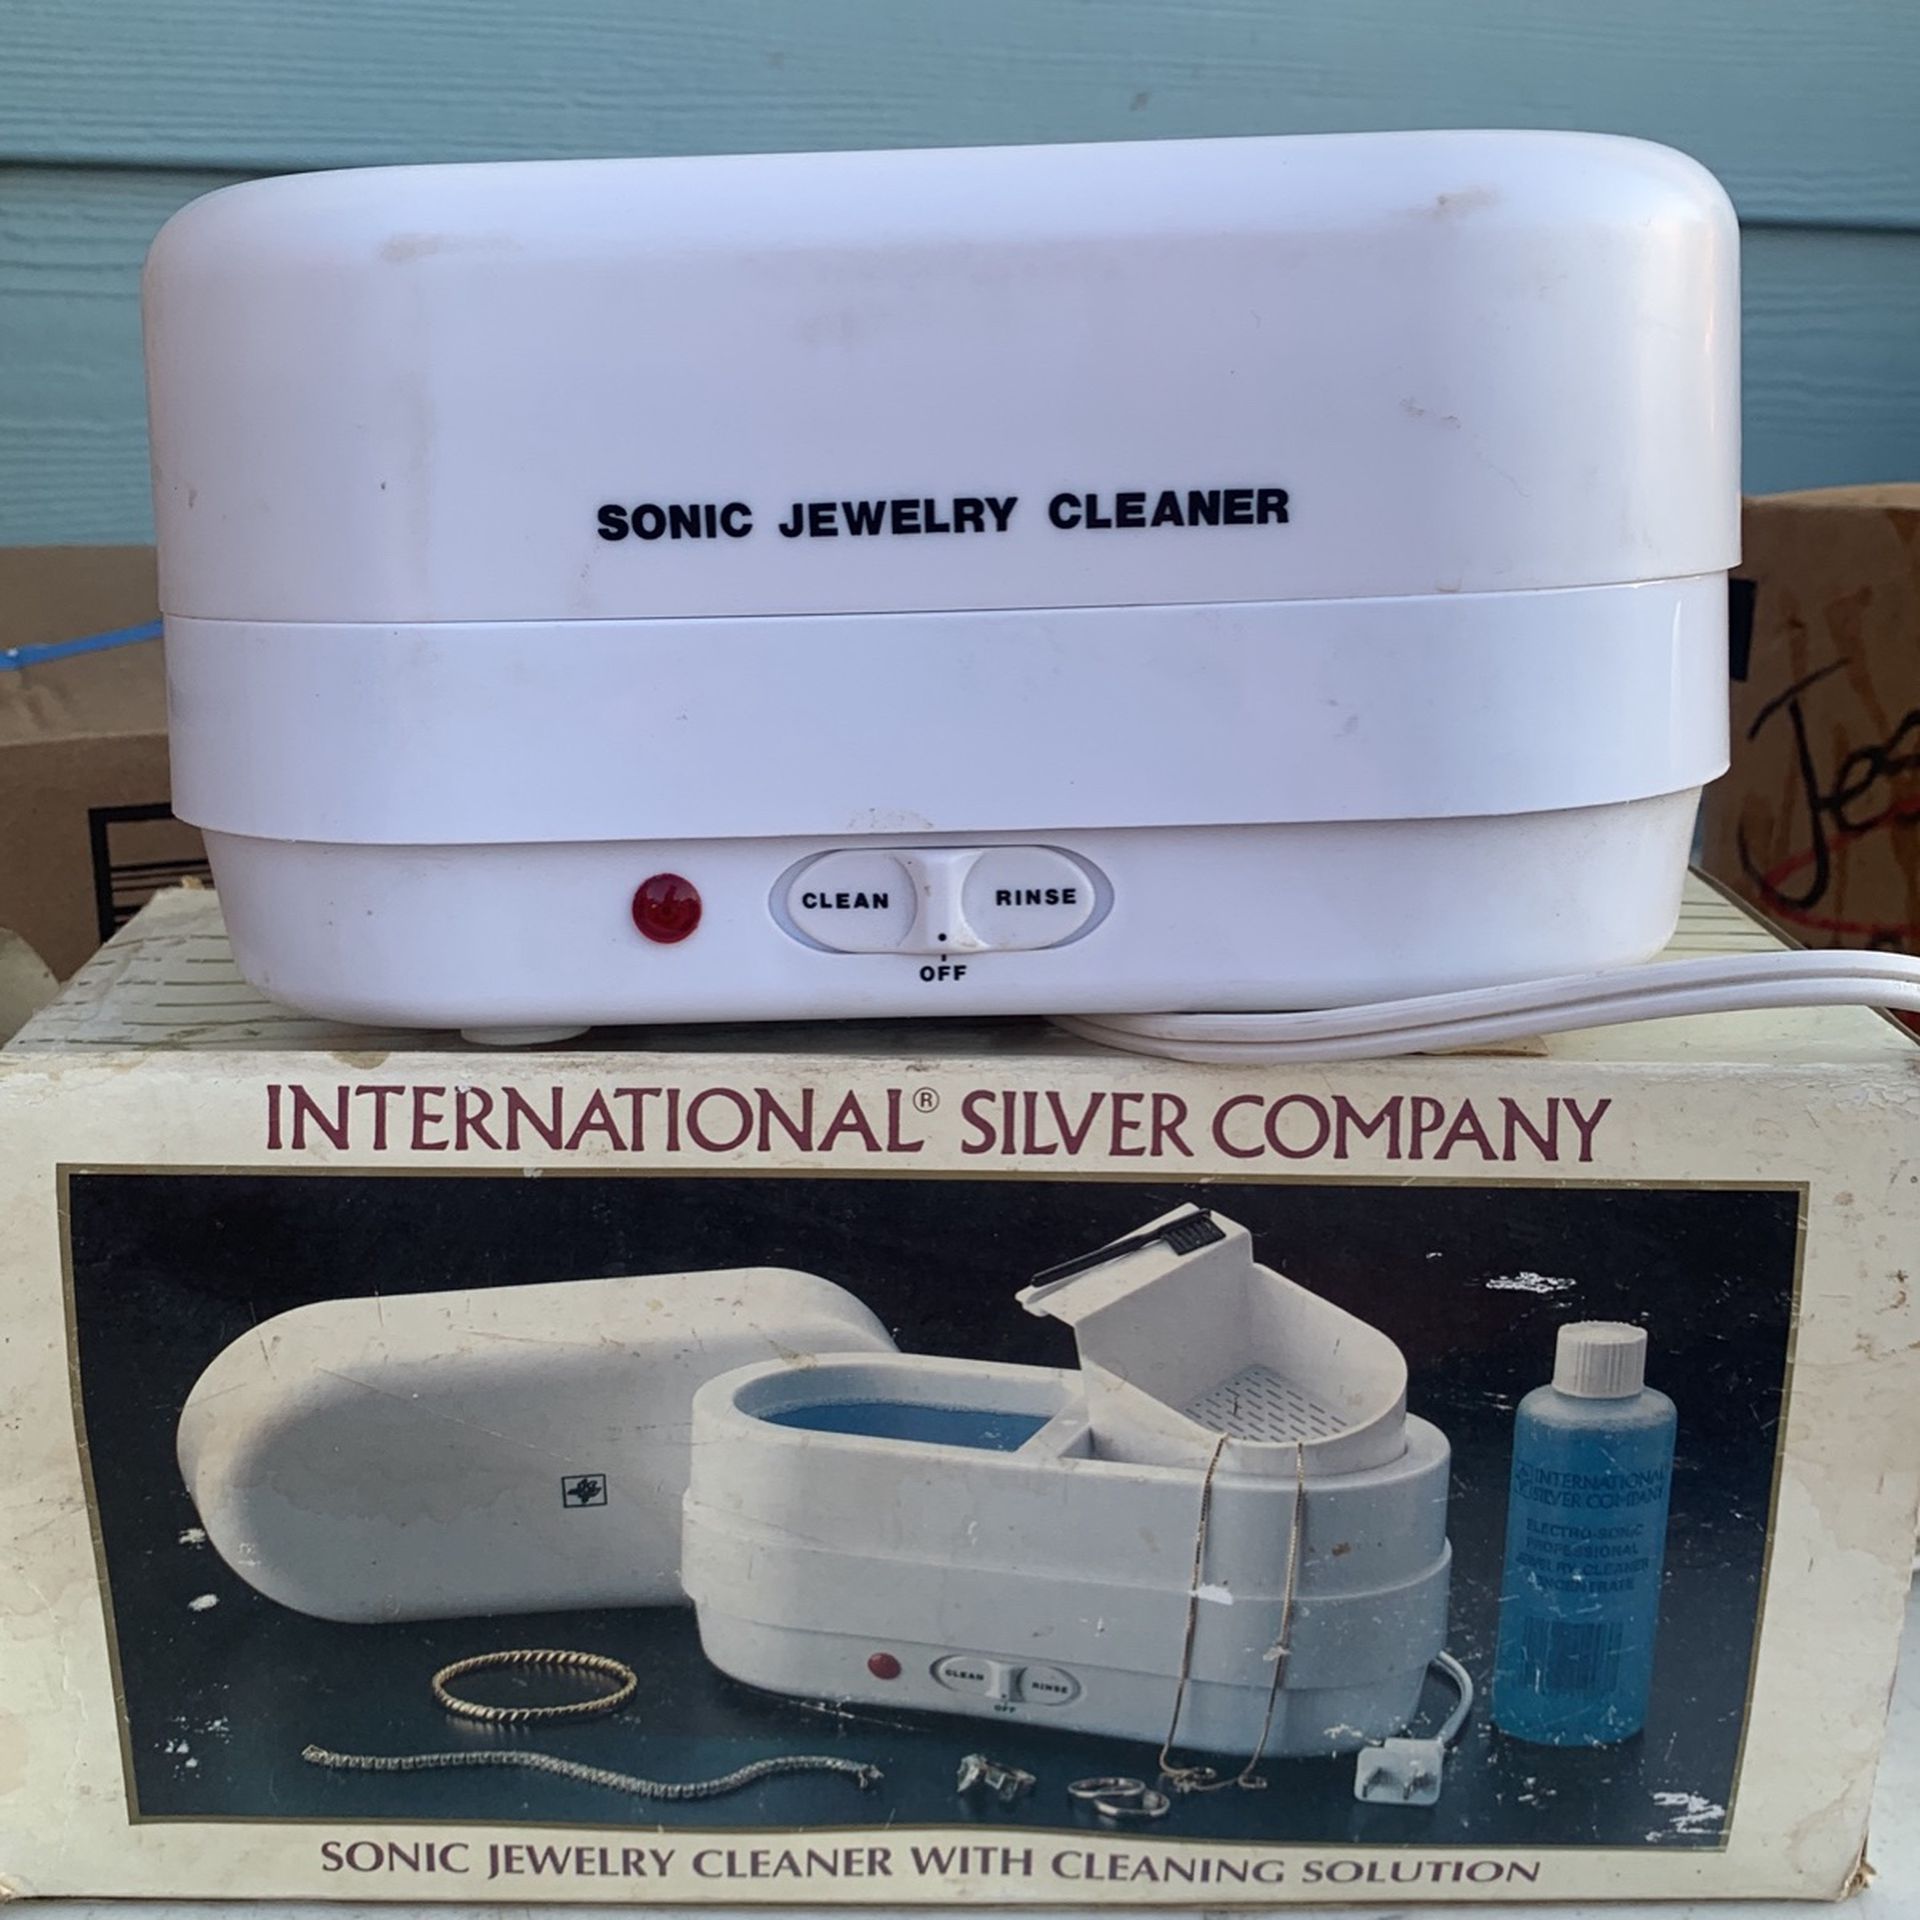 International silver company, sonic jewelry cleaner